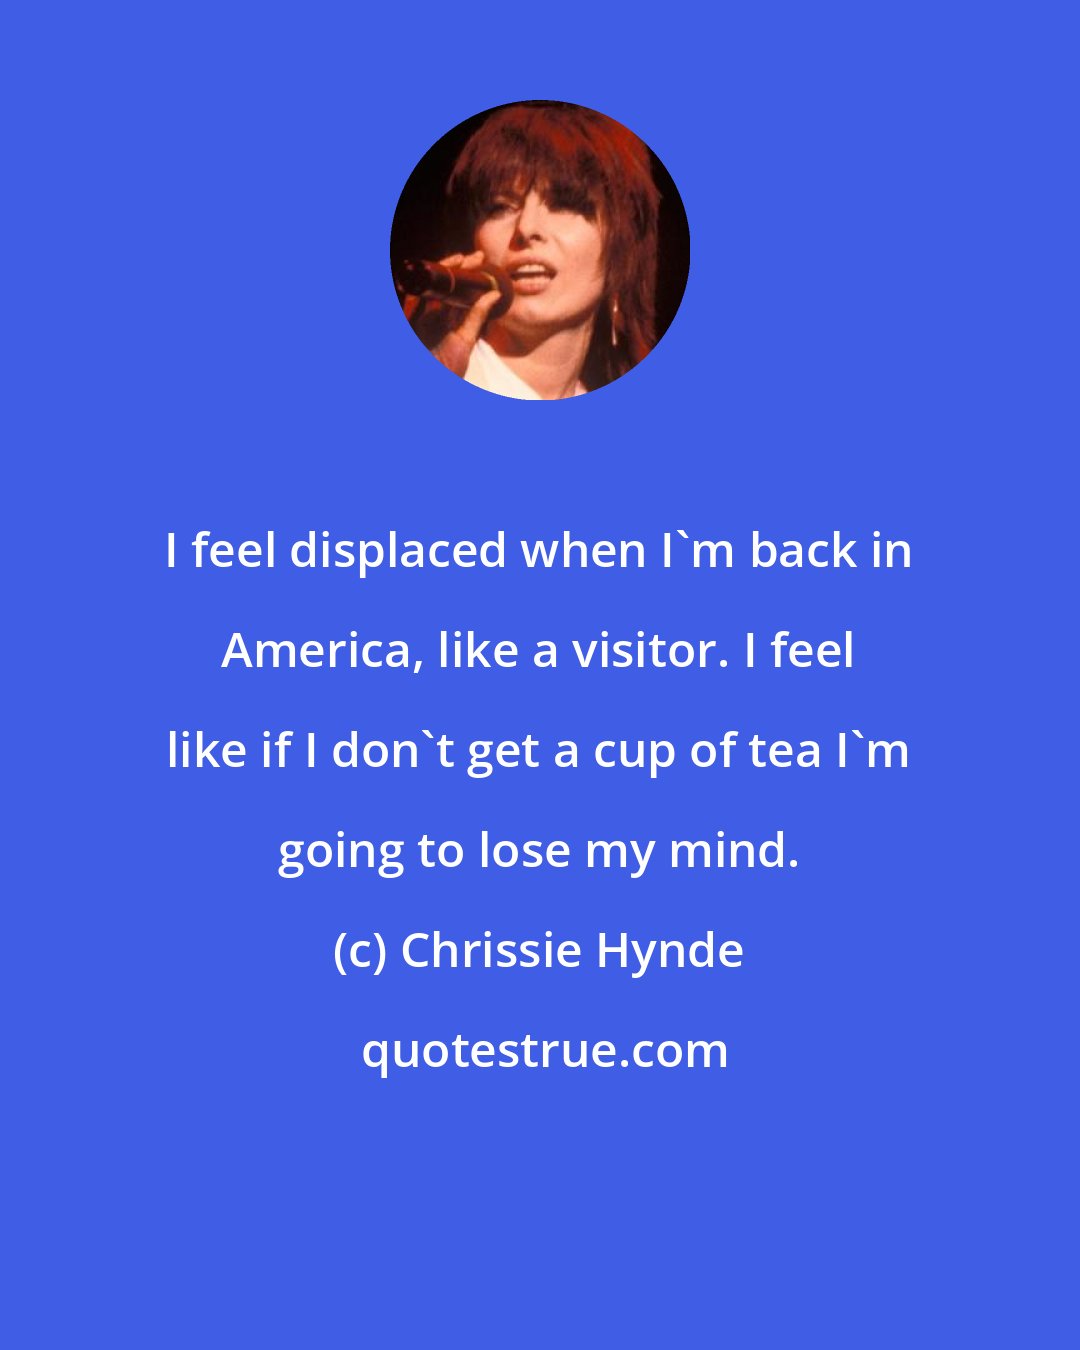 Chrissie Hynde: I feel displaced when I'm back in America, like a visitor. I feel like if I don't get a cup of tea I'm going to lose my mind.